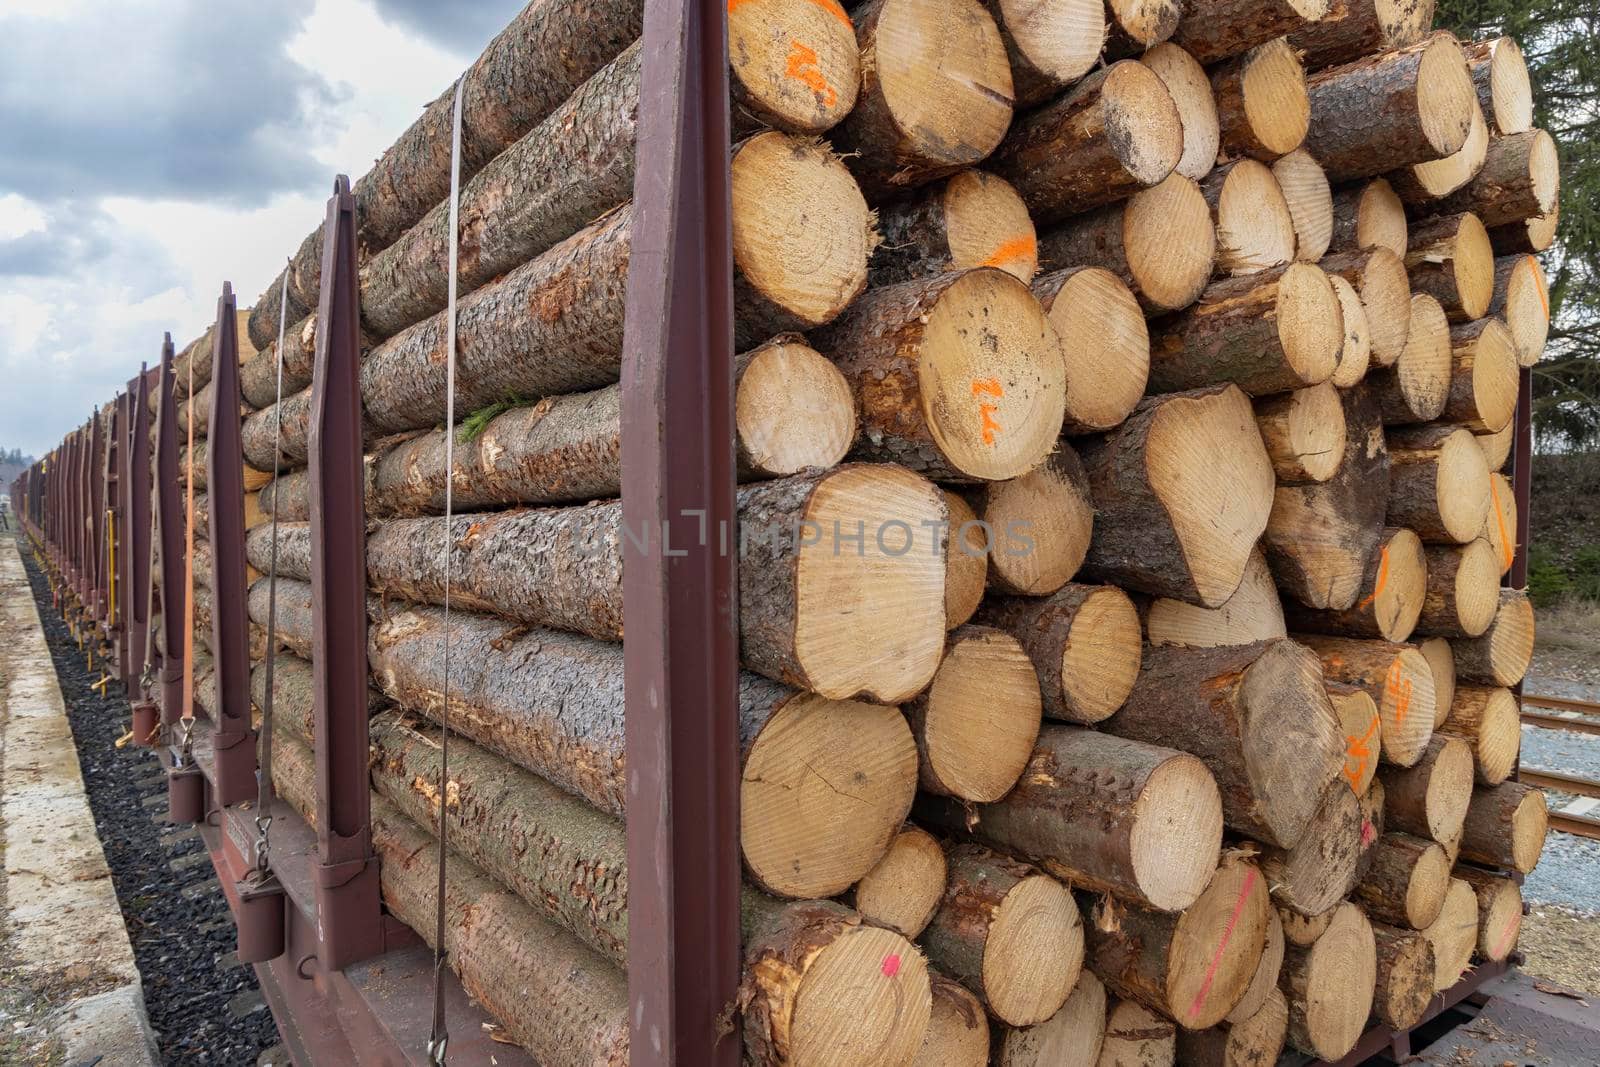 Transport of timber on railway wagons by phbcz